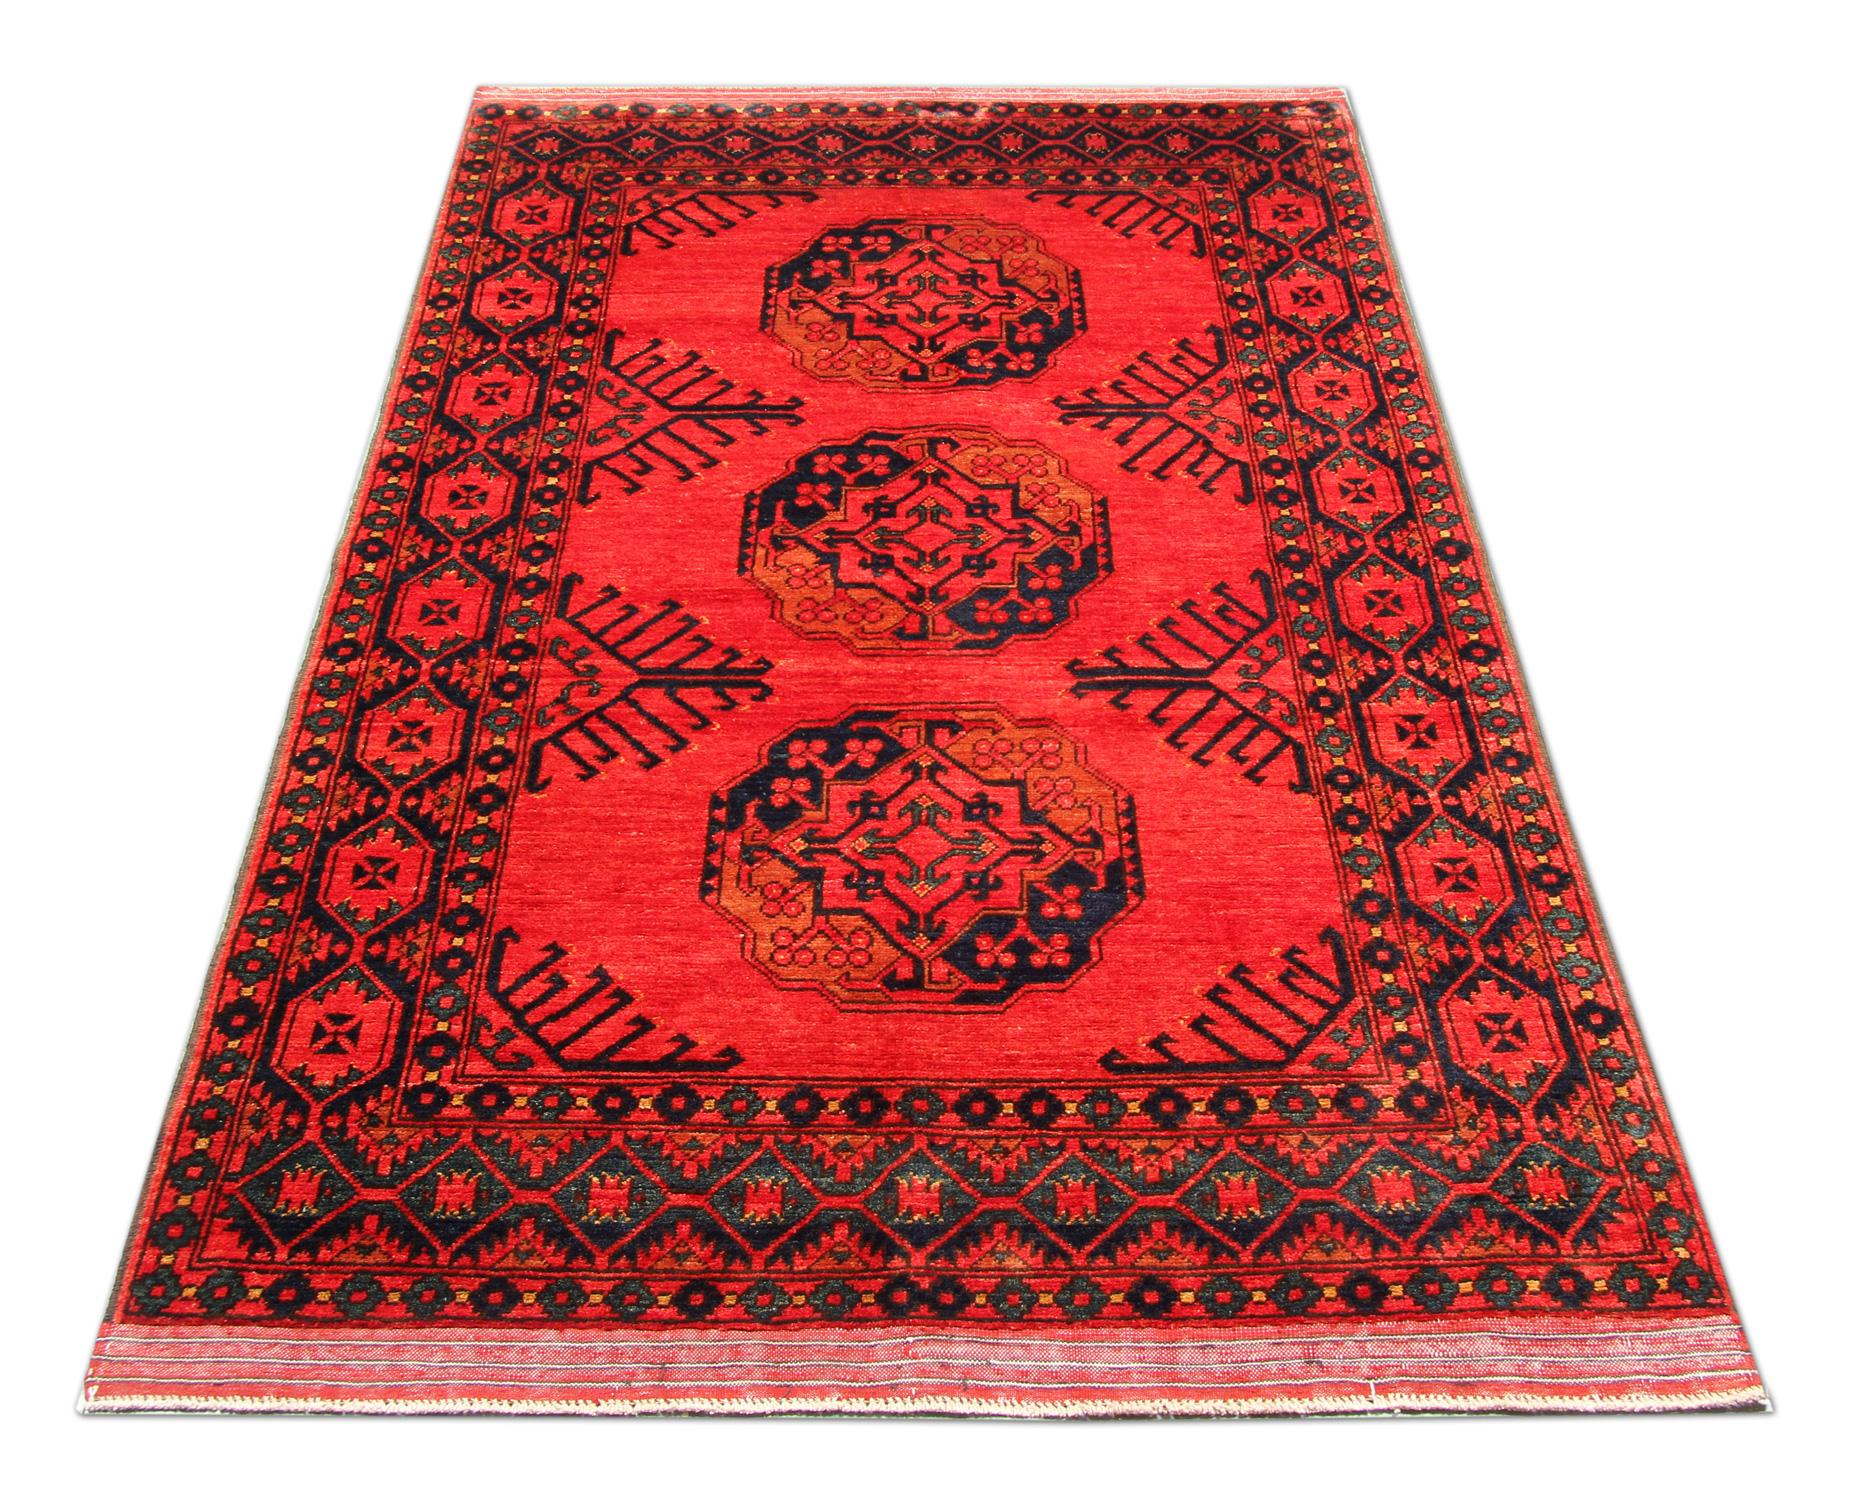 This traditional Turkman rug is one of our more luxurious rugs made on looms by master weavers of Afghan rugs. This cream rug is made with or all handspun wool, with the color coming from organic vegetable dyes. This carpet features a tribal